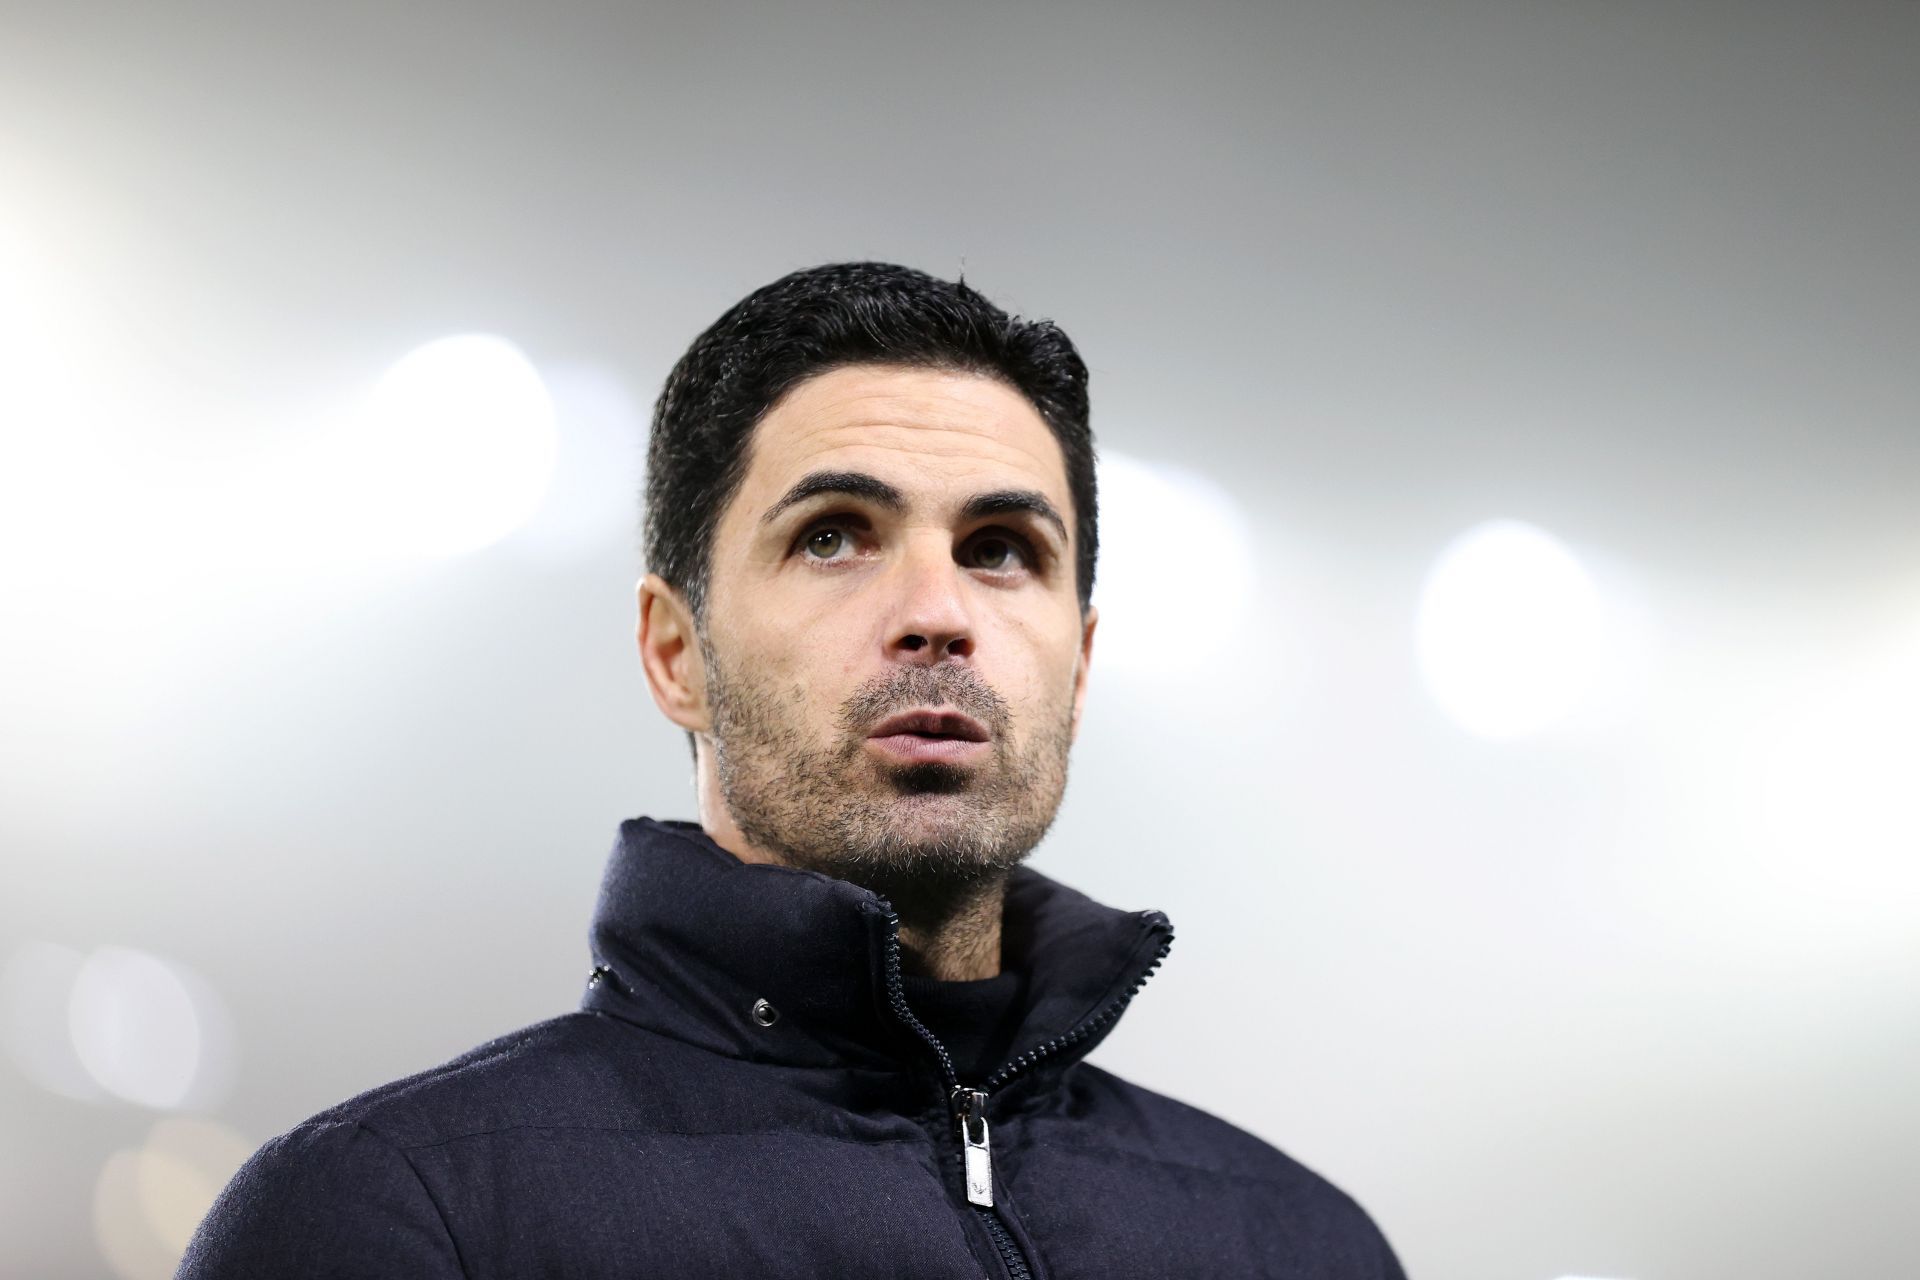 Arsenal manager Mikel Arteta secured a win over Leeds United on Saturday.